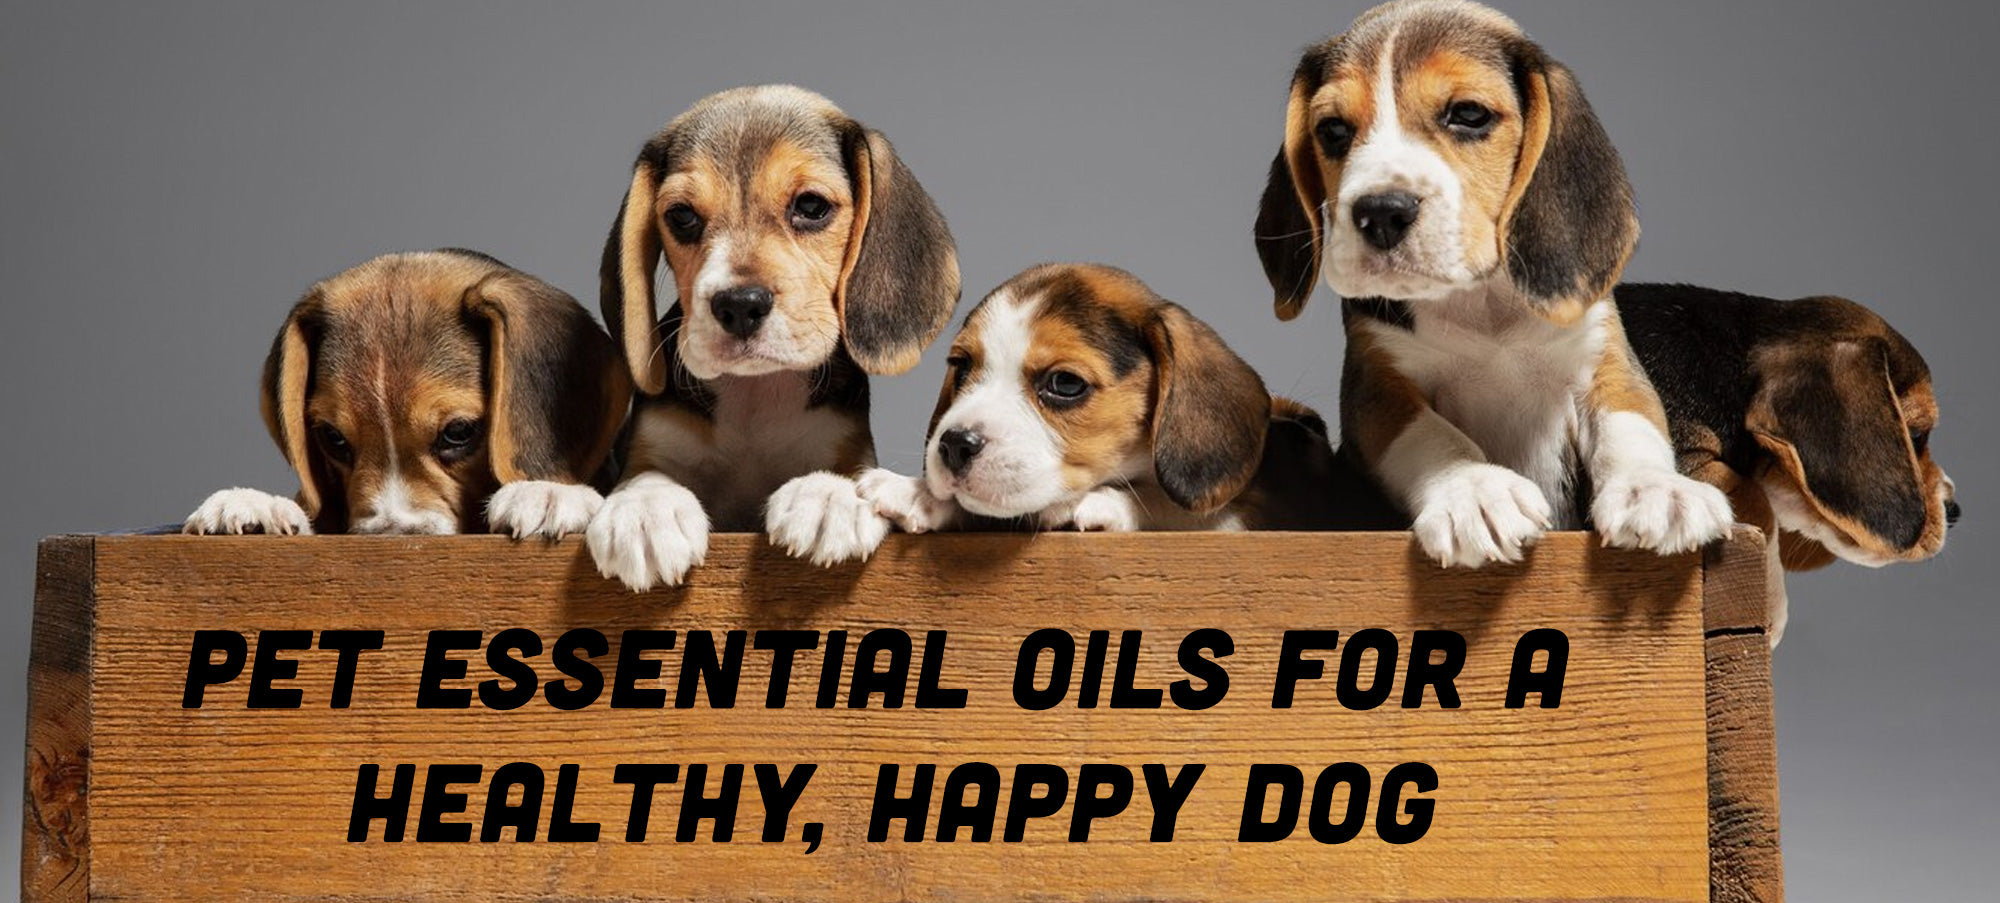 Pet Essential Oils Safe for Your Dogs